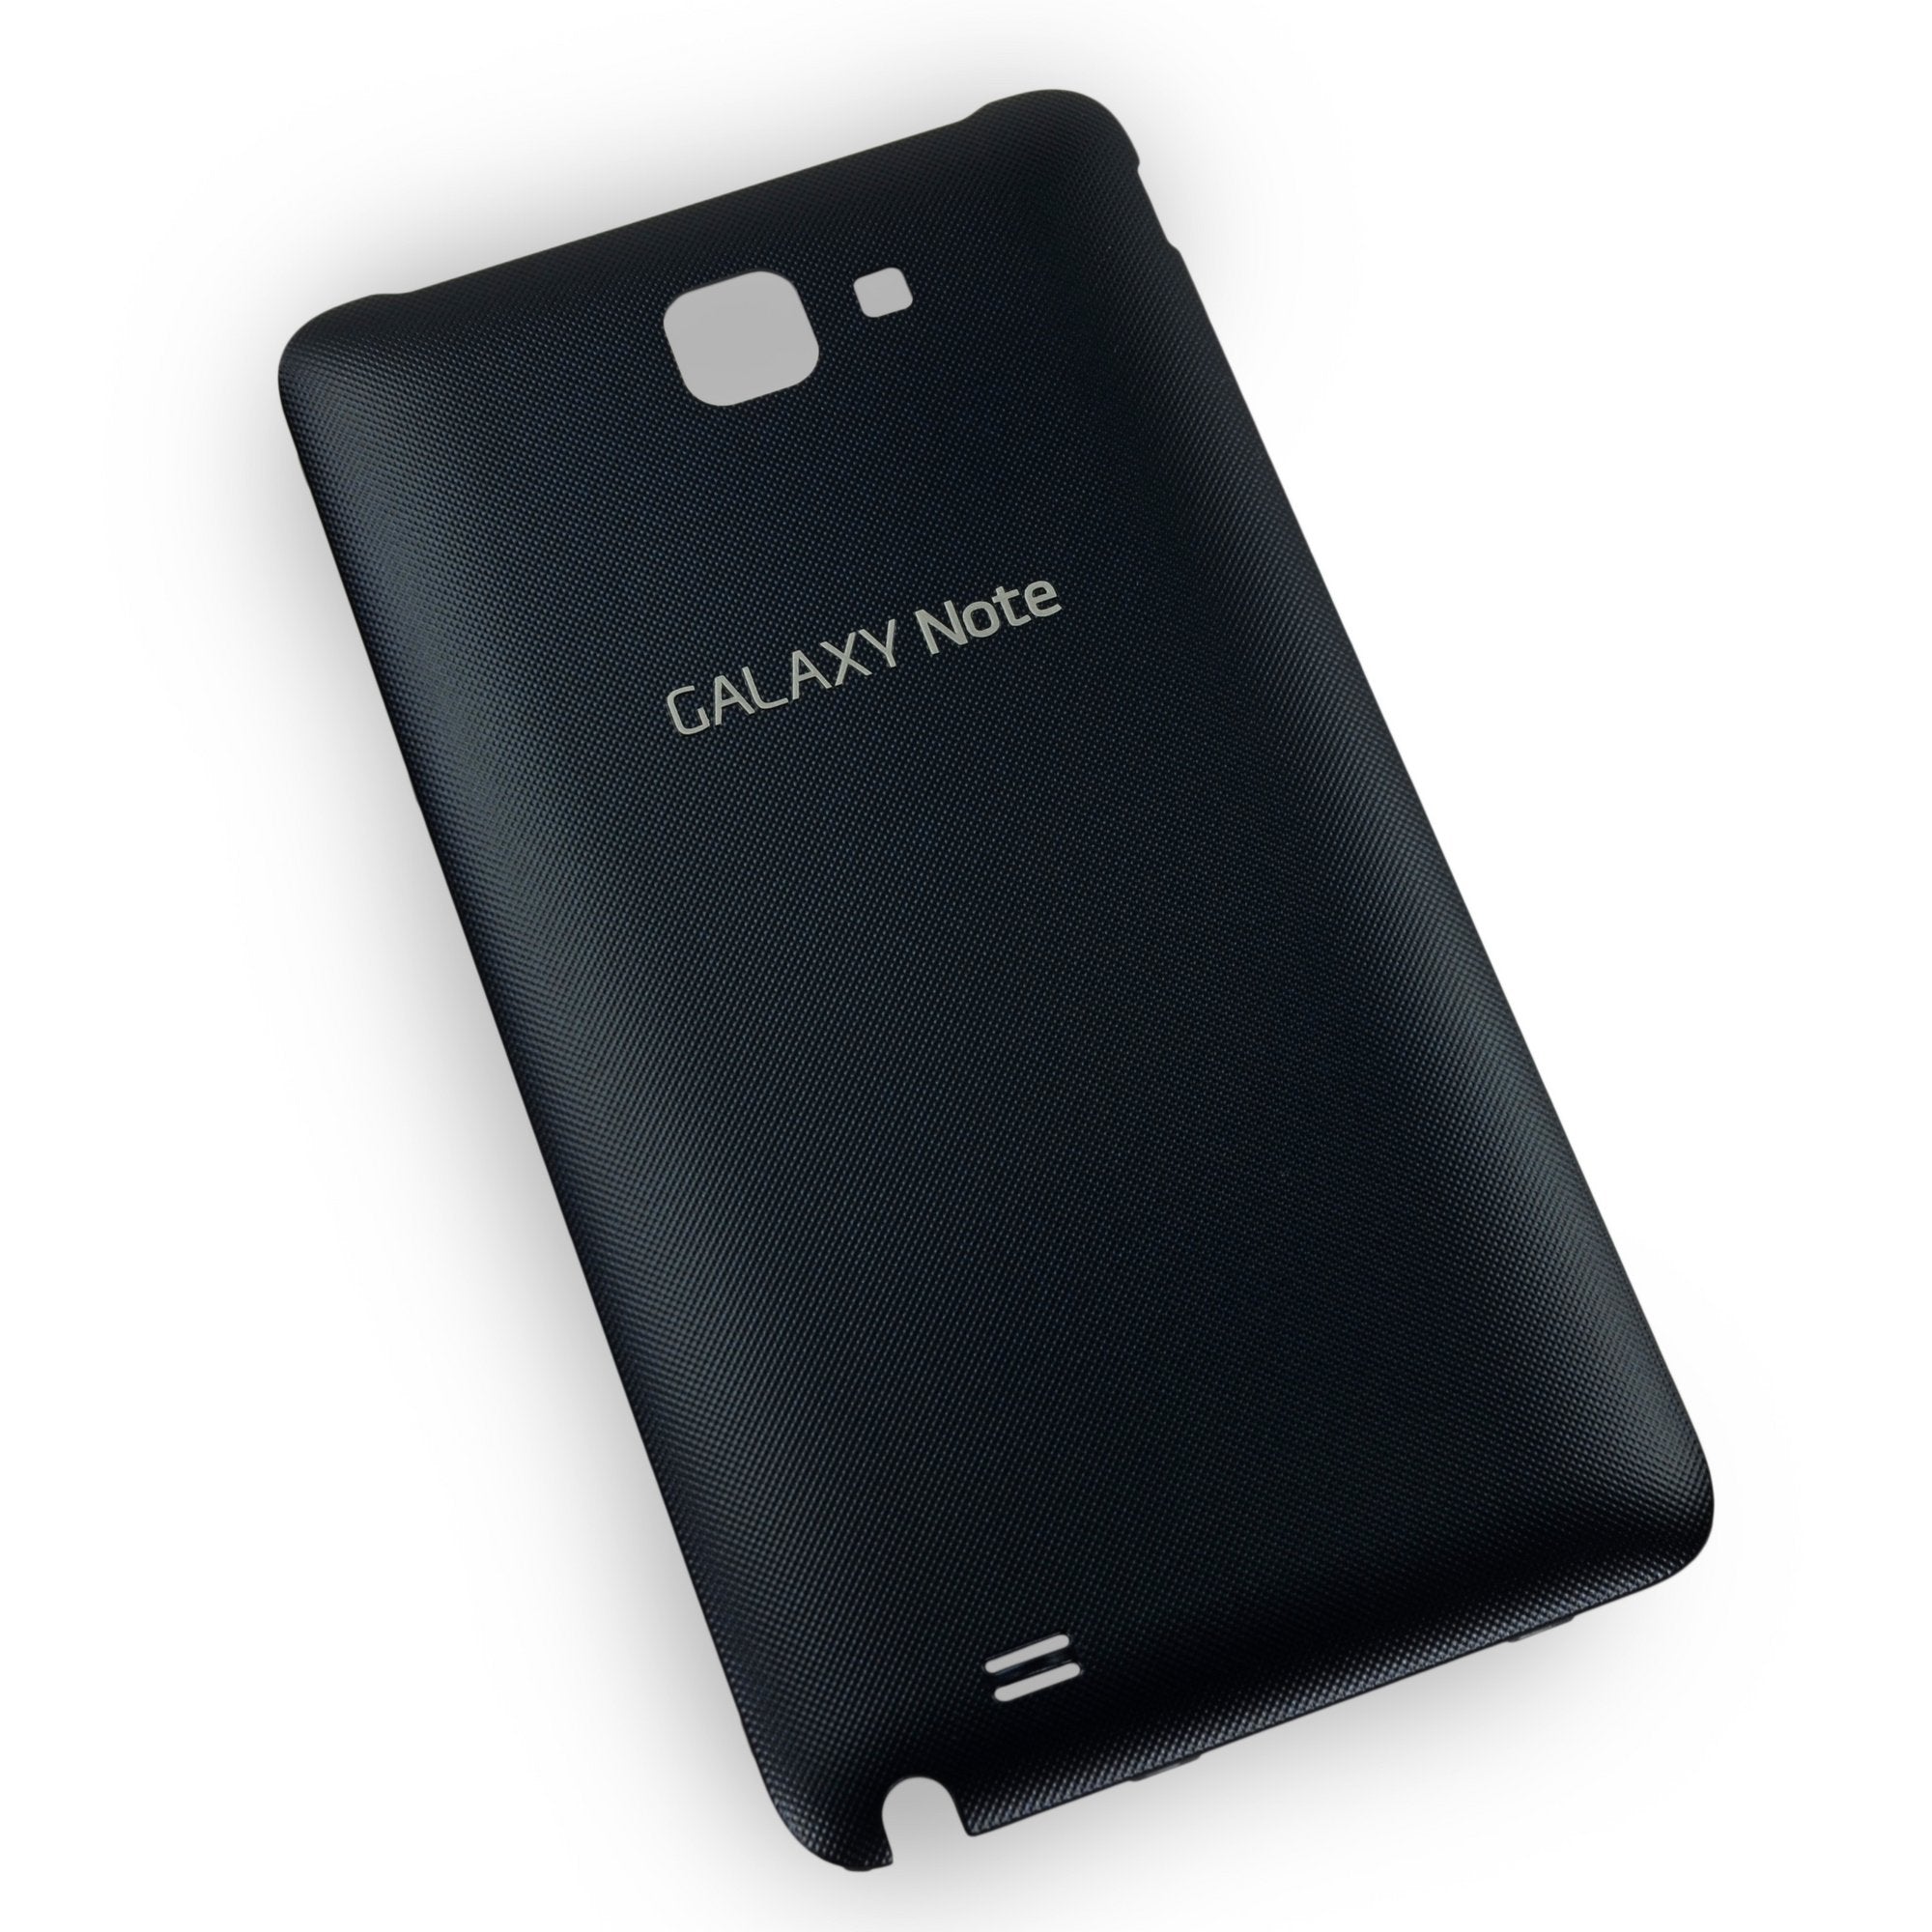 Galaxy Note Battery Cover (AT&T) Black New GH98-21680A